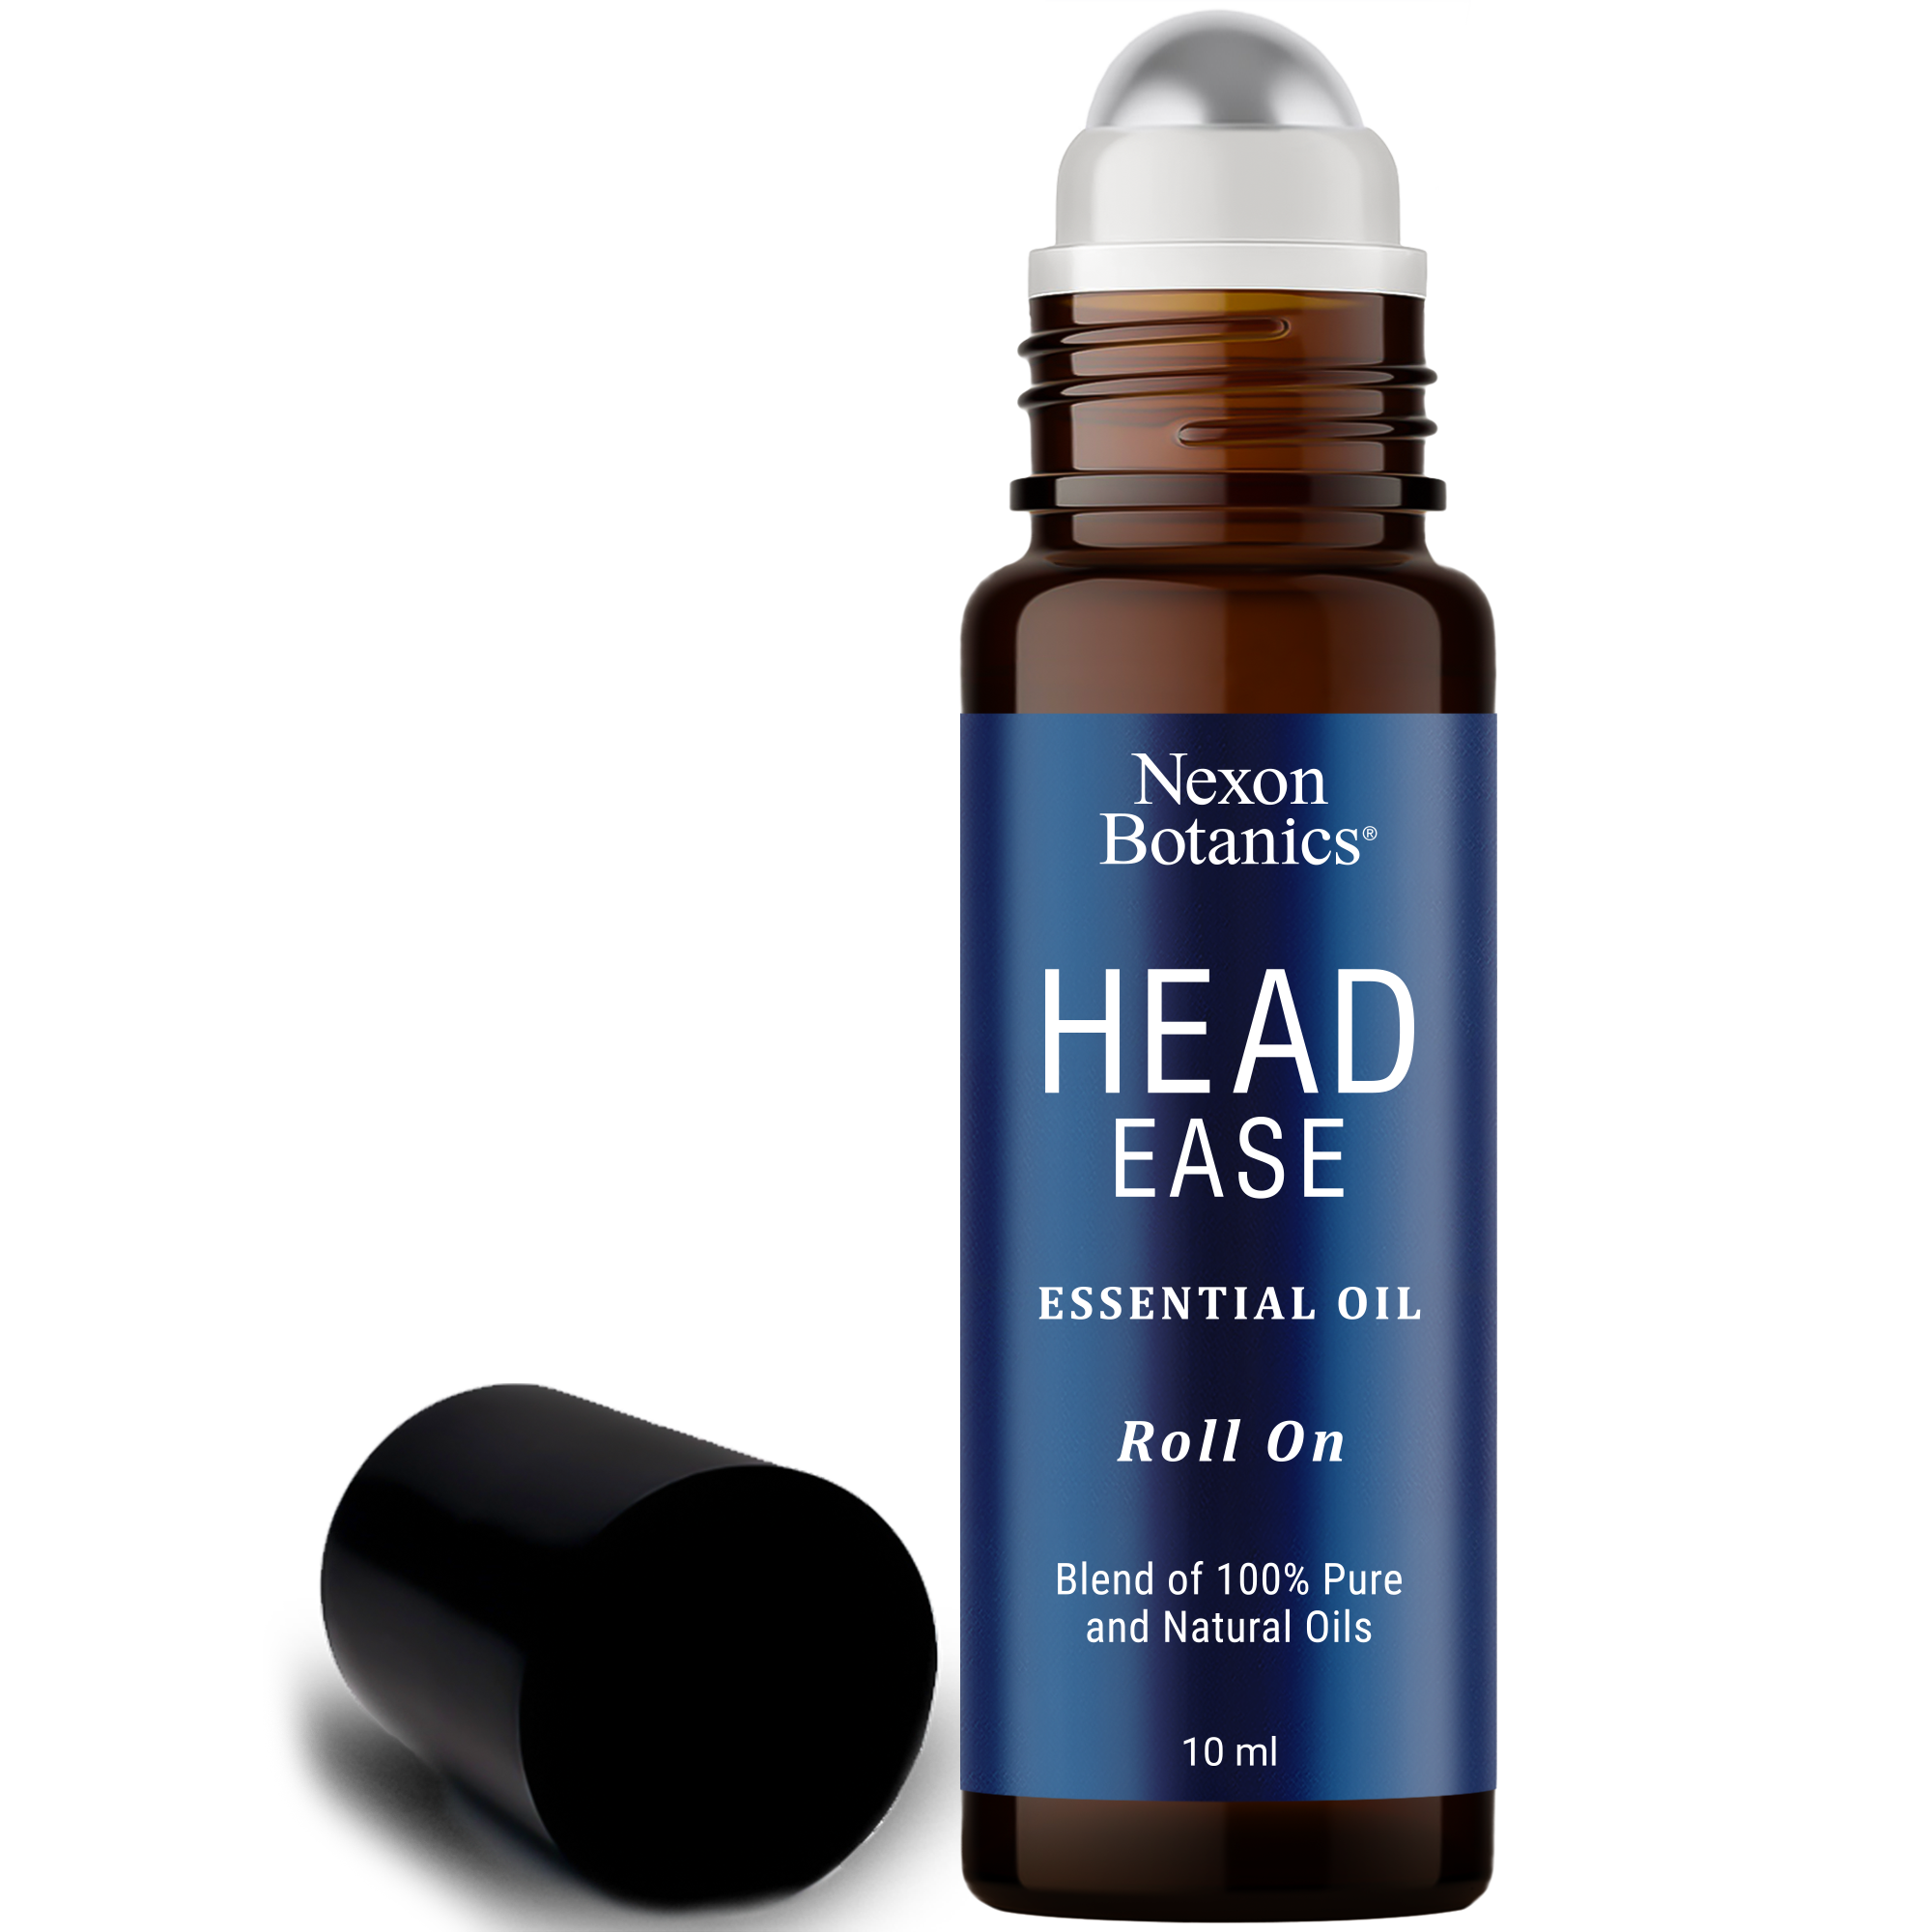 Head Ease Essential Oil Roll-On